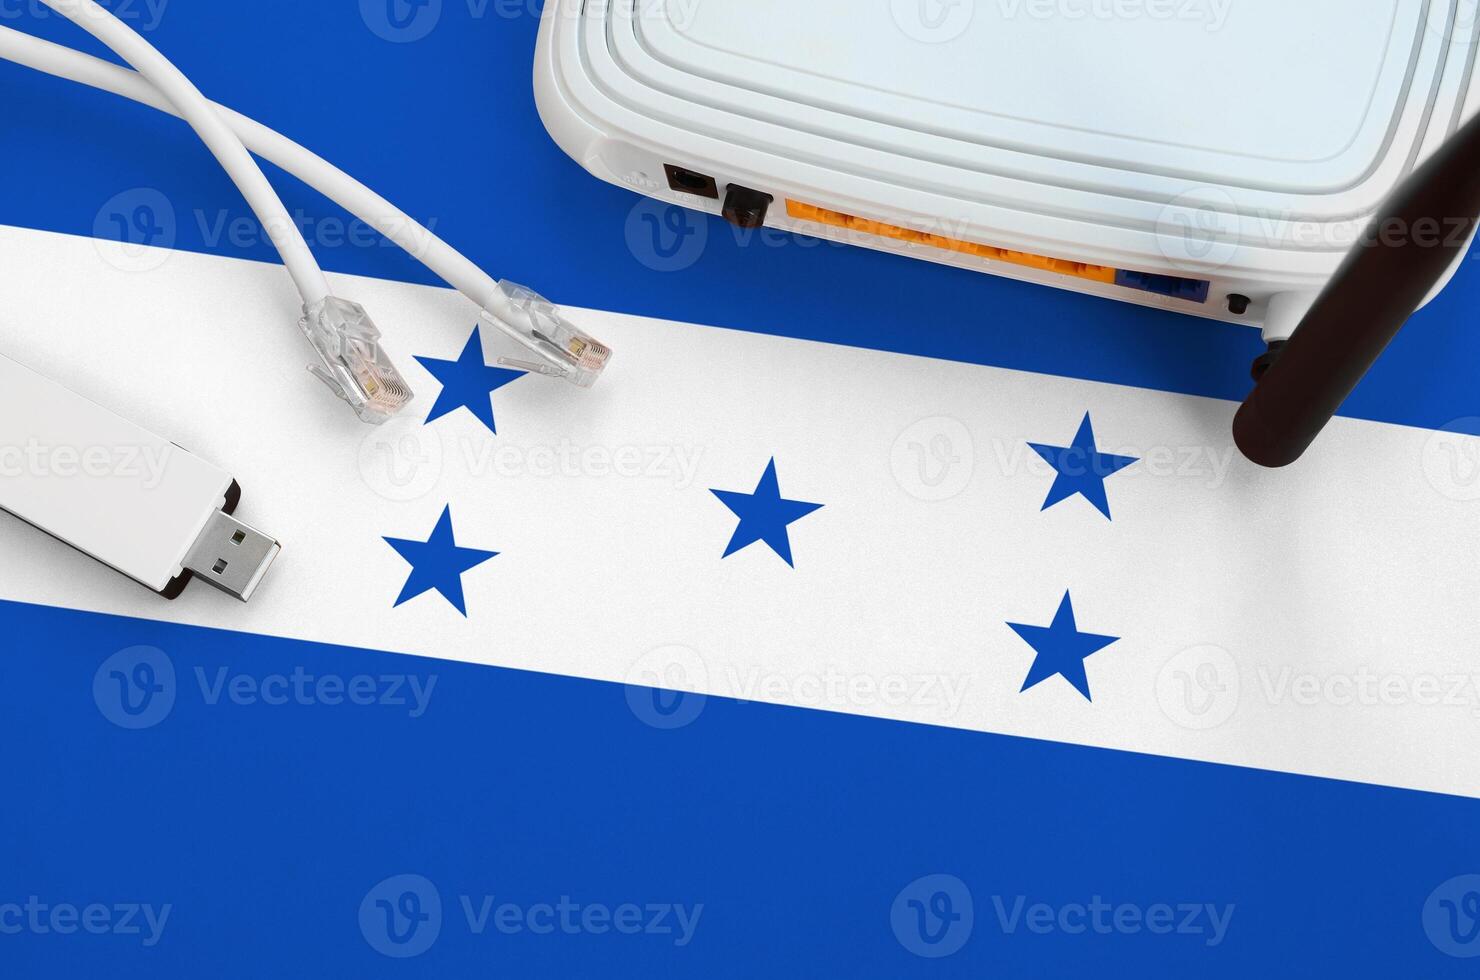 Honduras flag depicted on table with internet rj45 cable, wireless usb wifi adapter and router. Internet connection concept photo